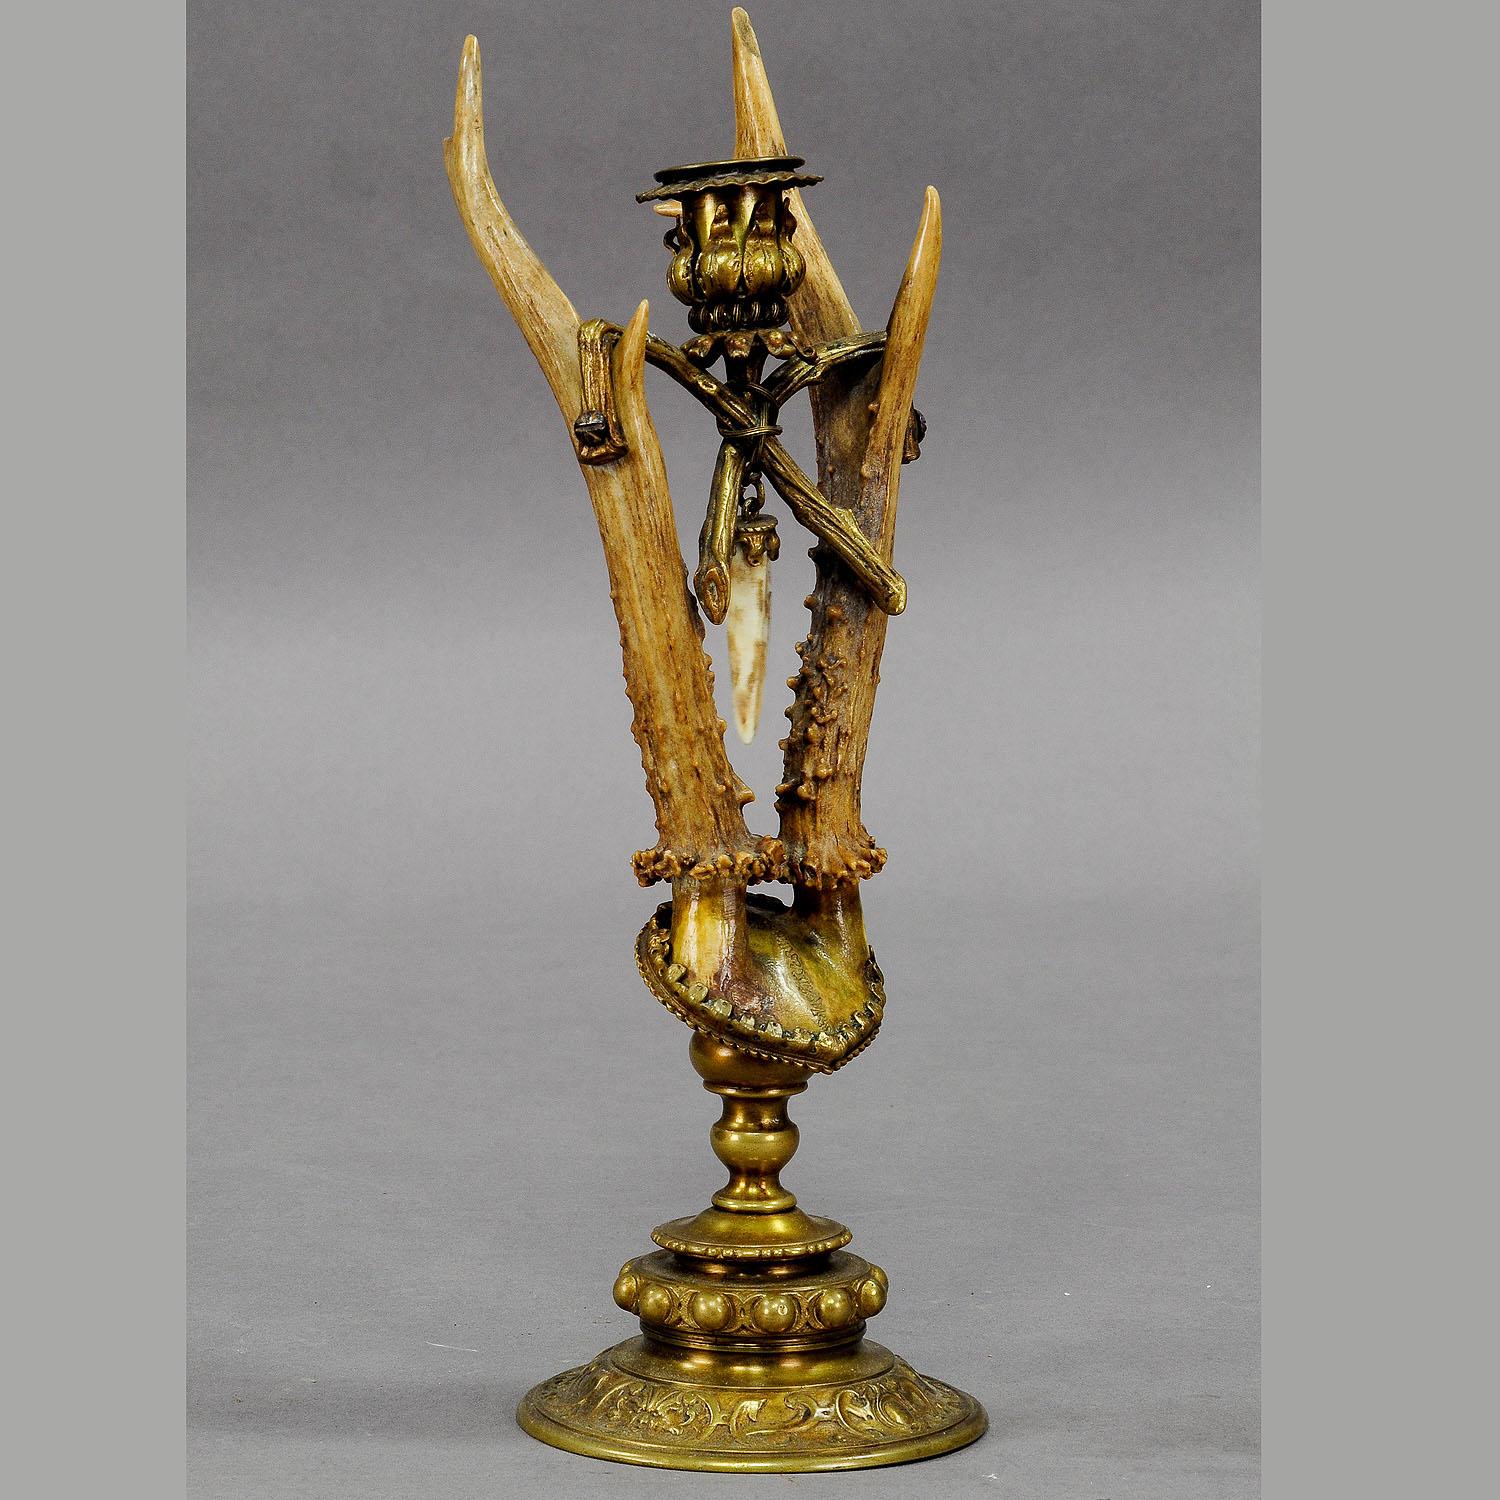 A decorative candleholder which is made of deer antlers mounted on a brass base. A roe deer trophy at the center, cased with brass. It is decorated with a wild boar tooth pendant. The candleholder is executed in Germany ca. 1880.

At the beginning